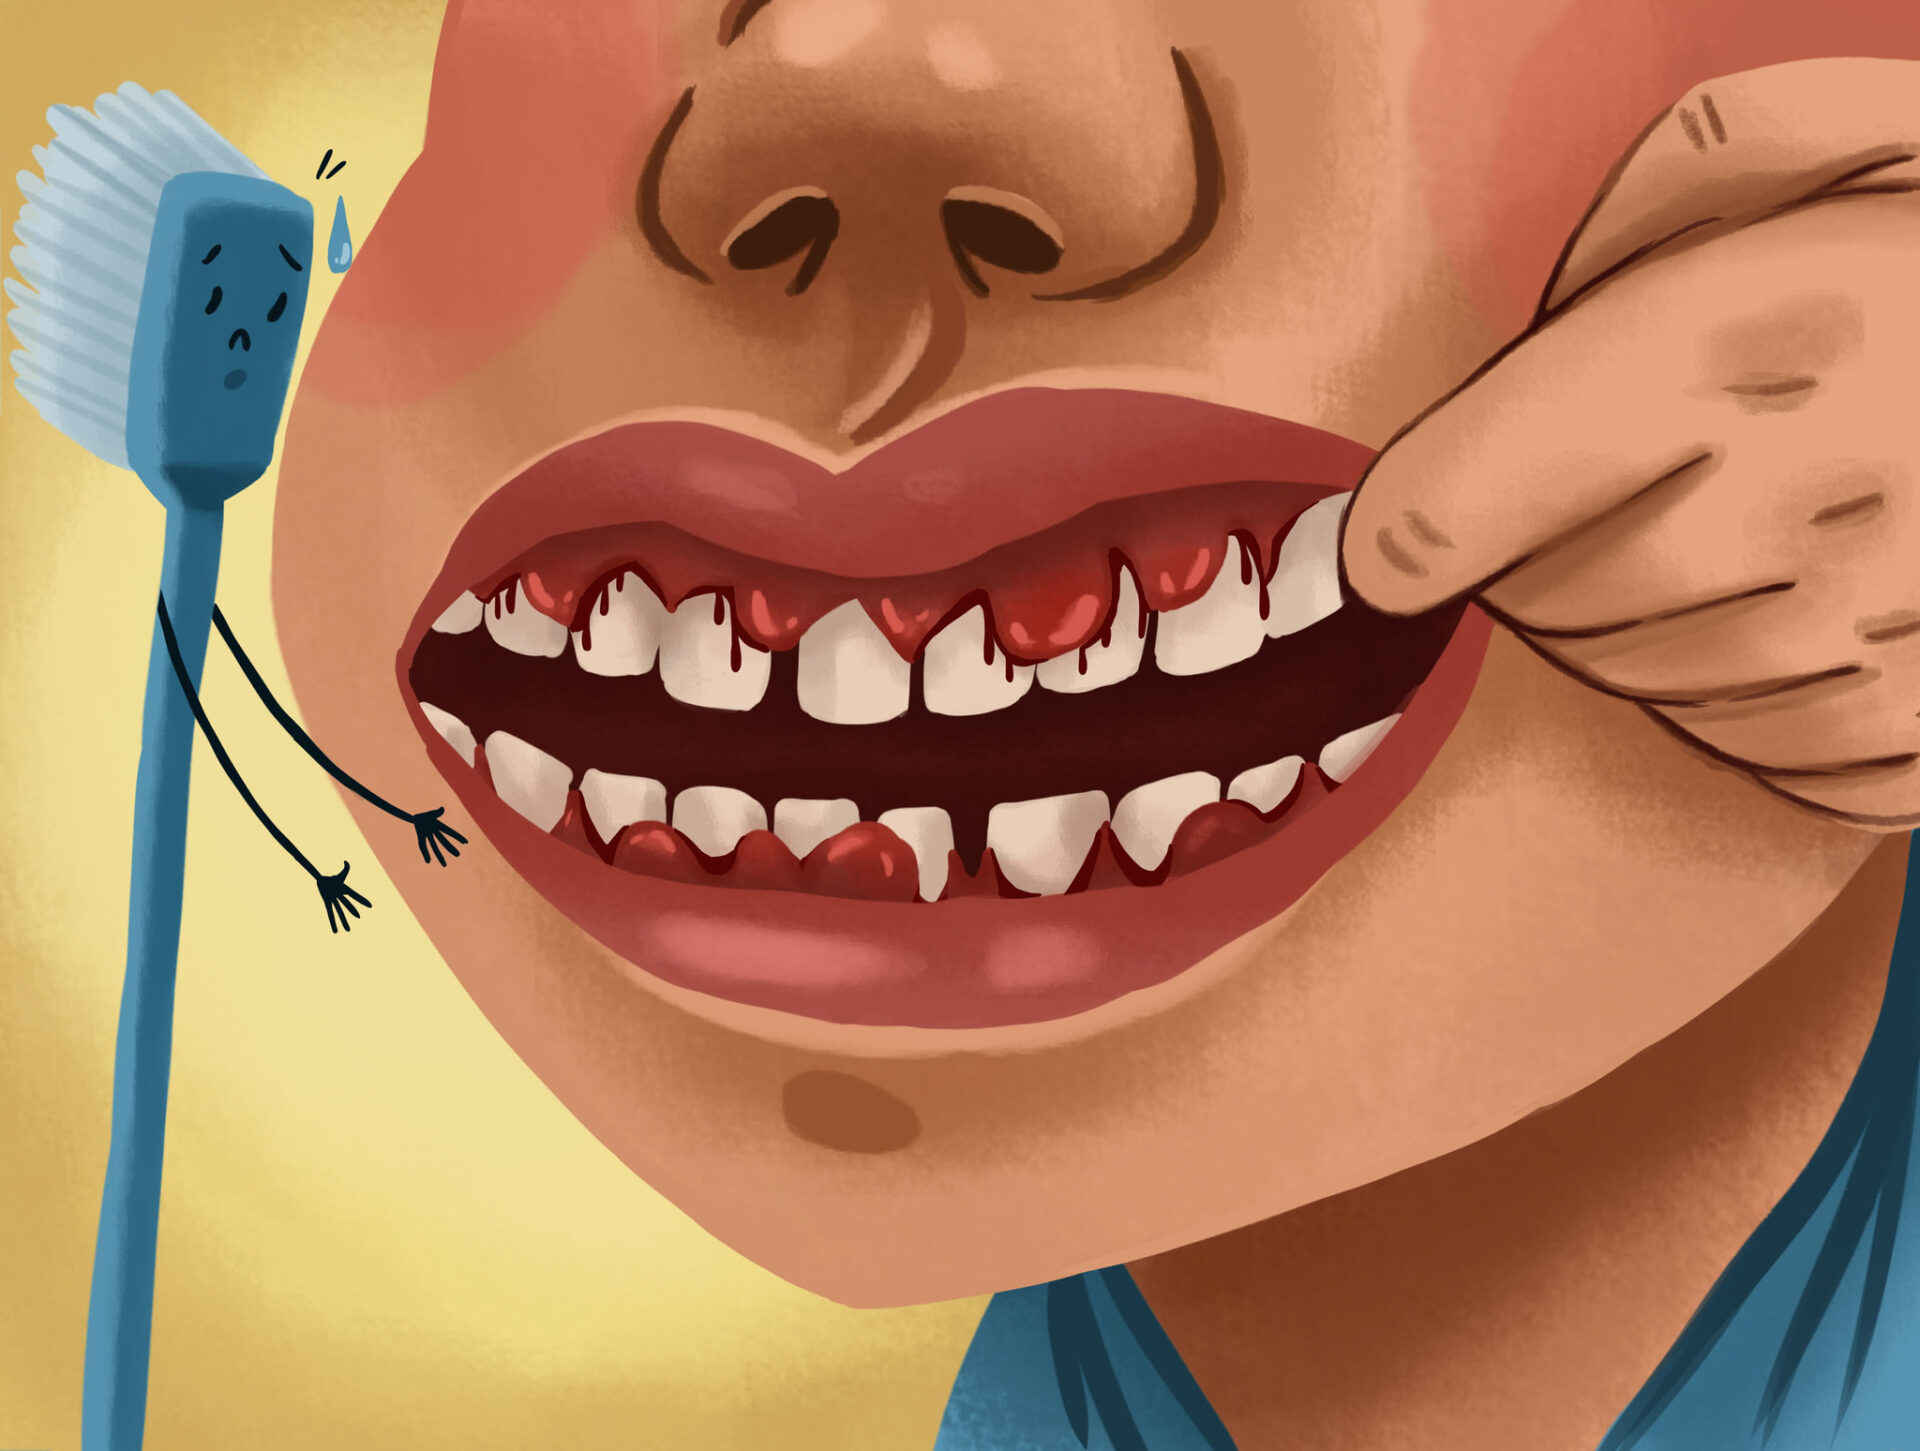 Graphic illustration of person with bleeding gums, an example of a common dental problem.